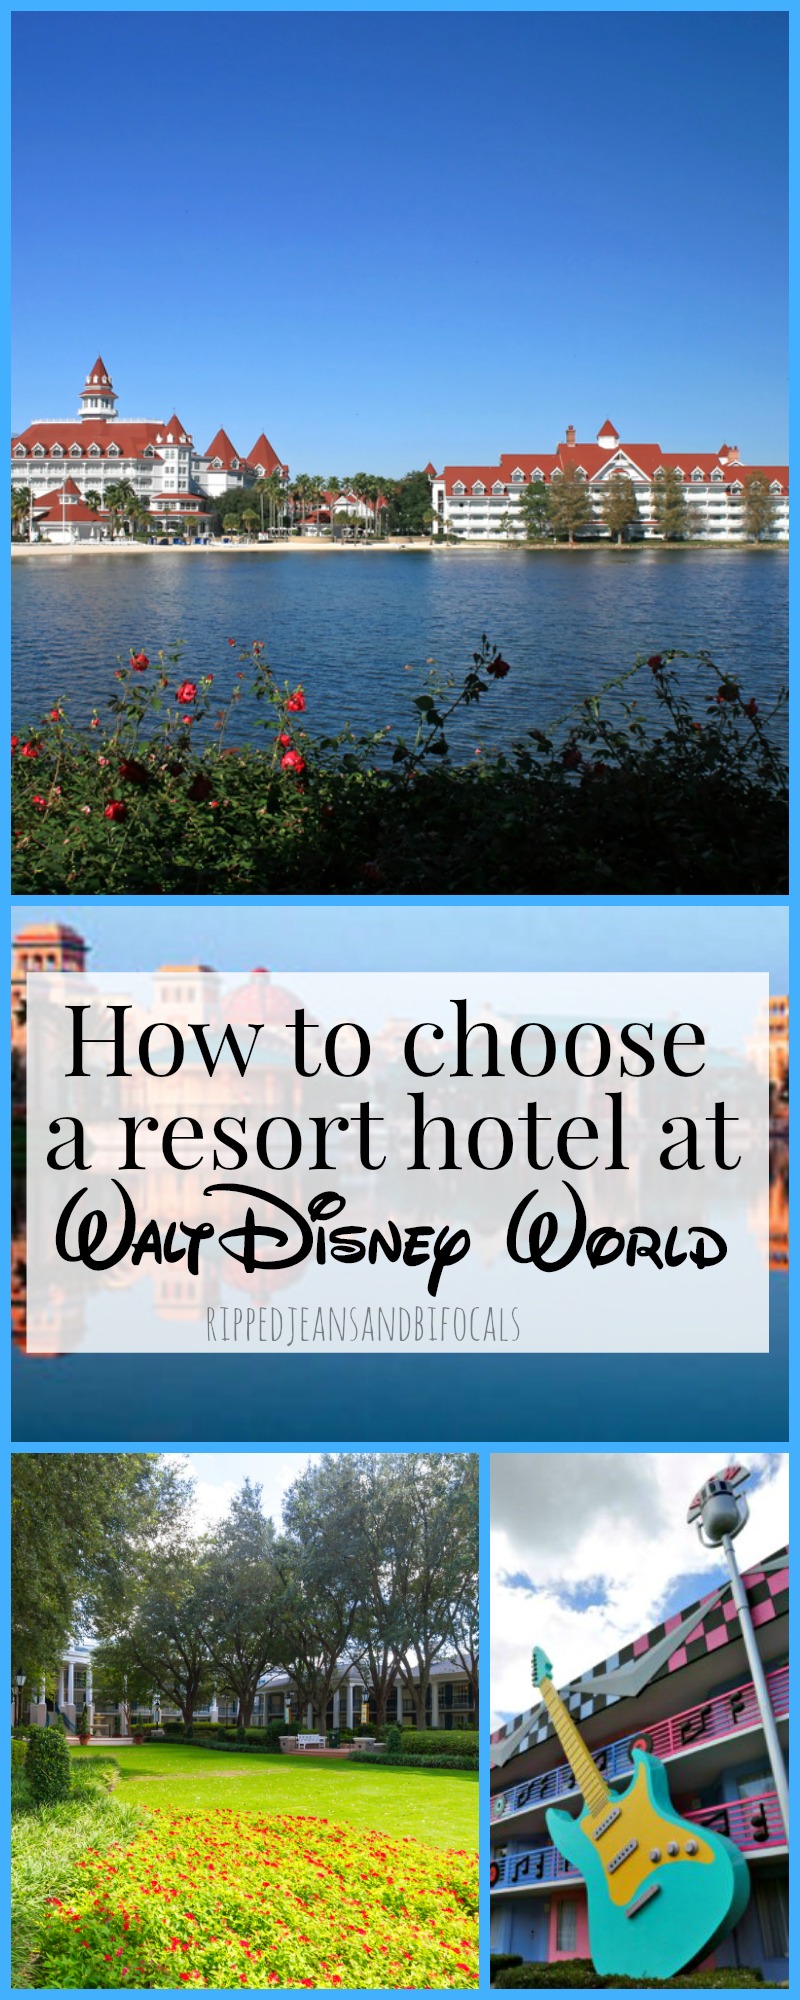 Are you wondering how to choose a resort hotel at Walt Disney World? Check out my post on the difference between the value, moderate and deluxe resorts at Walt Disney World|Ripped Jeans and Bifocals